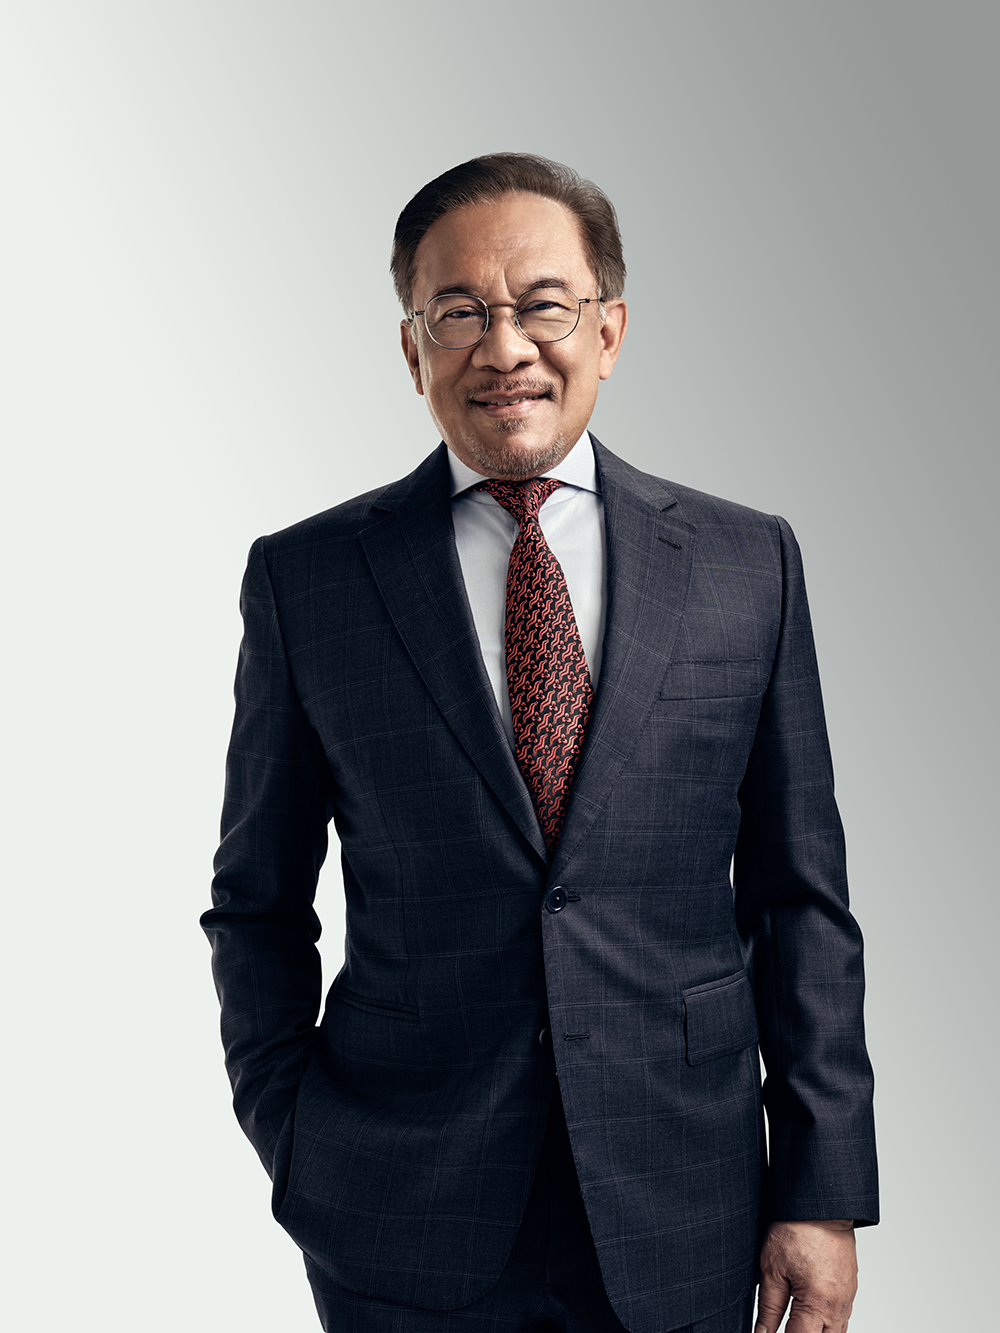 Malaysia’s Prime Minister YAB Dato’ Seri Anwar Ibrahim will be headlining the joint opening ceremony of AtoZero ASEAN and IGEM 2023